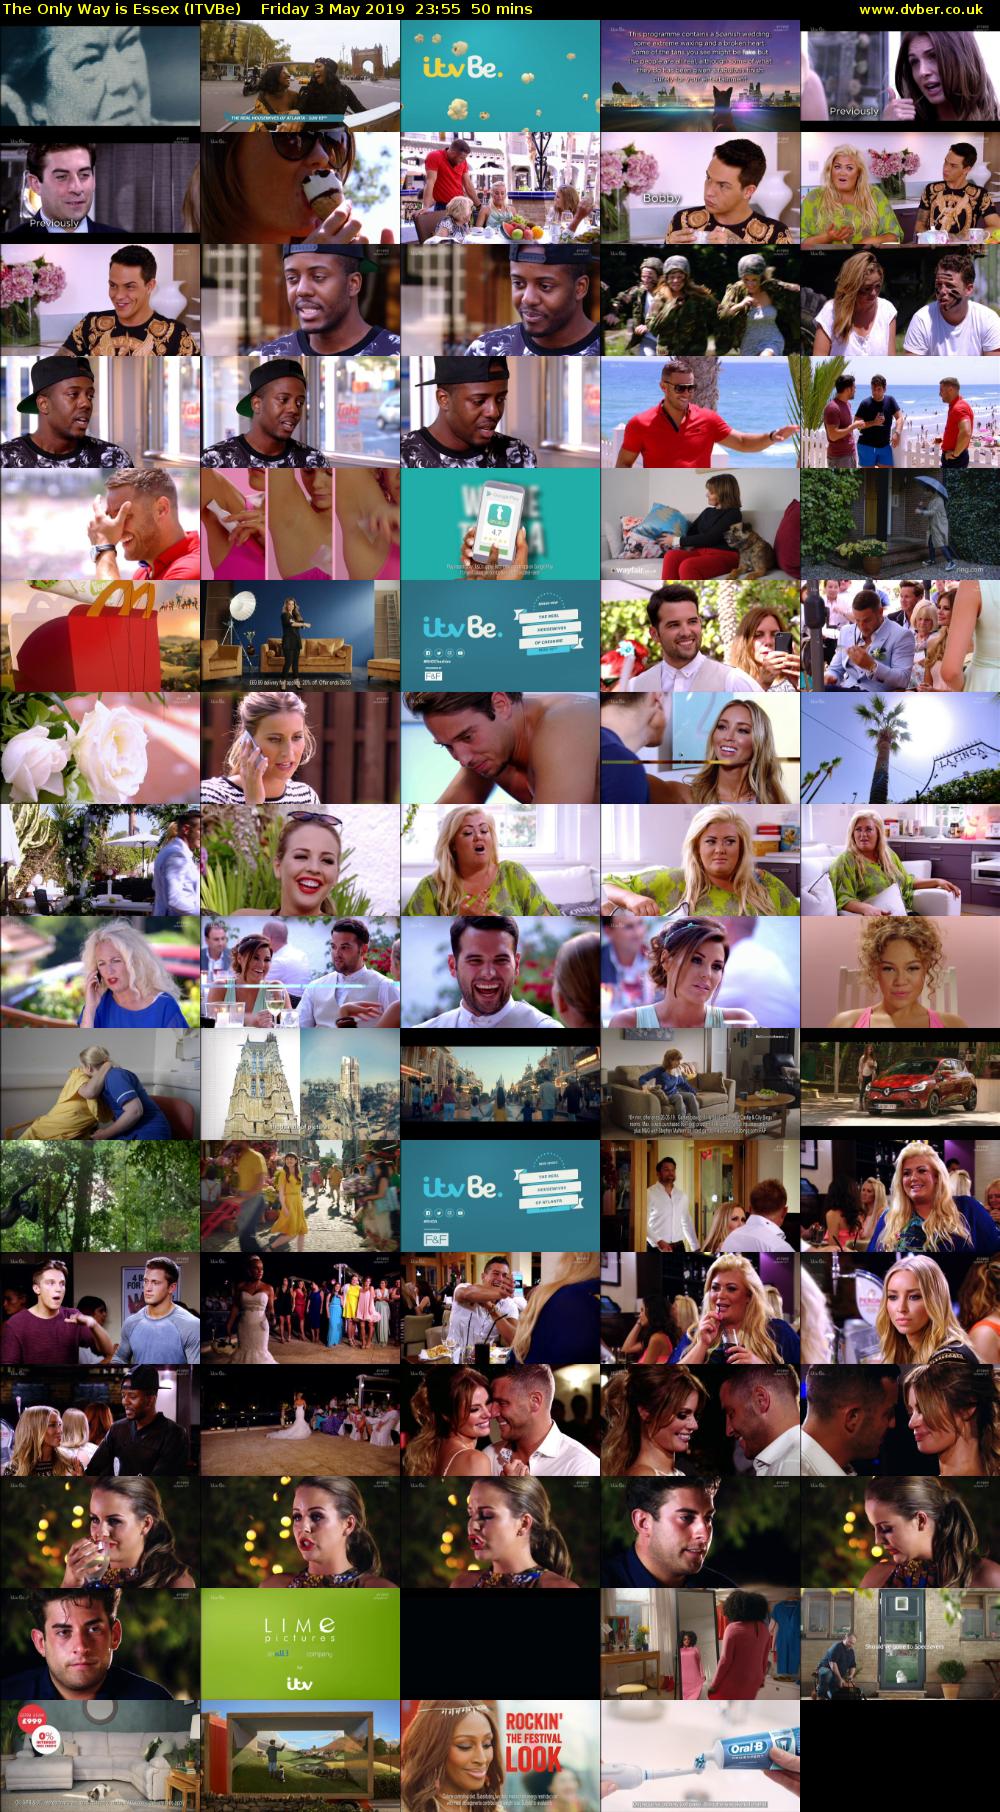 The Only Way is Essex (ITVBe) Friday 3 May 2019 23:55 - 00:45